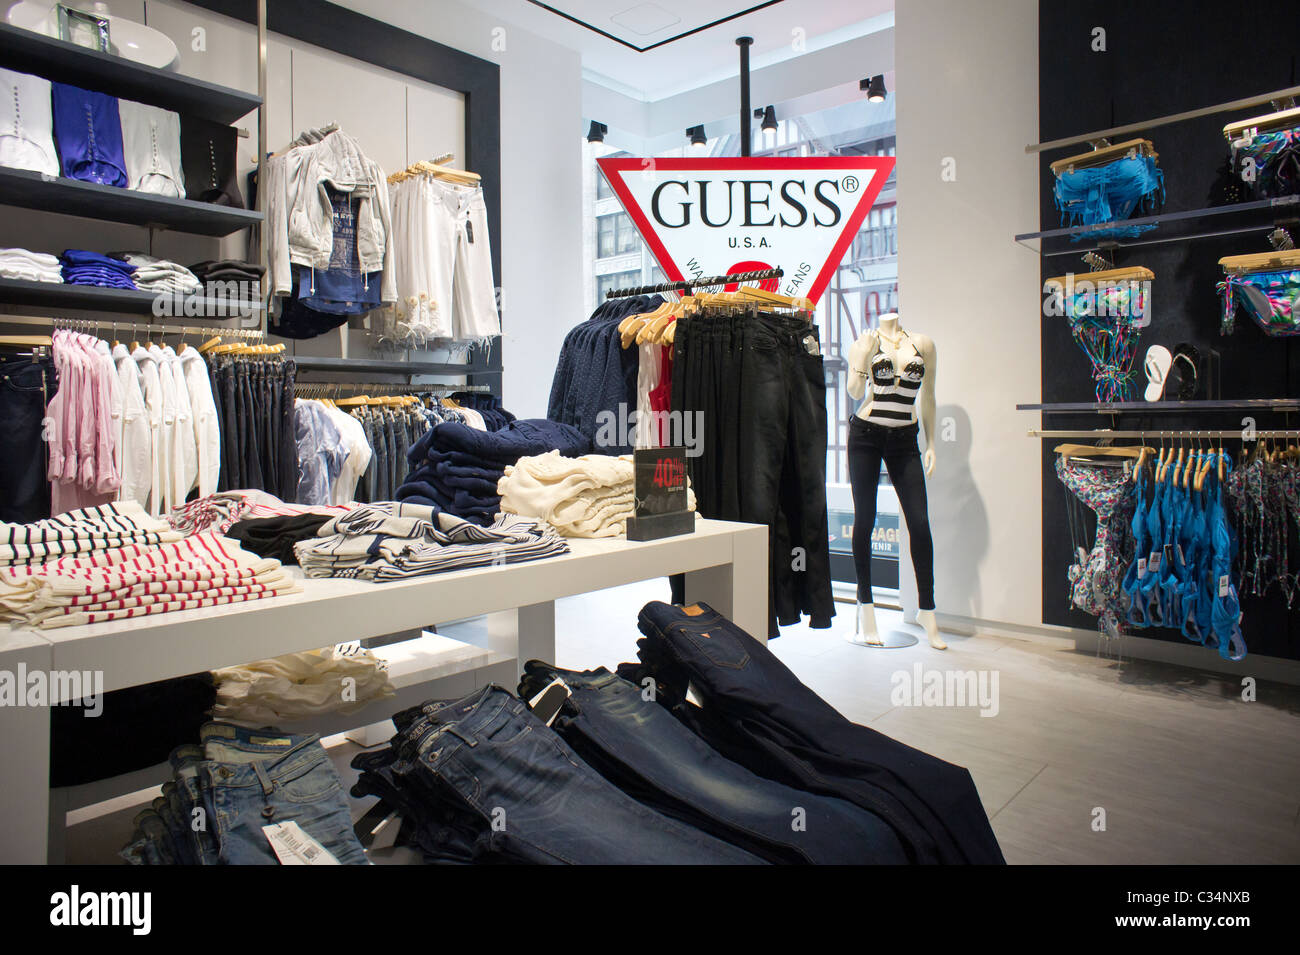 GUESS, the trend setting jeans retailer, opens its new flagship store on Fifth Avenue in New York Photo - Alamy